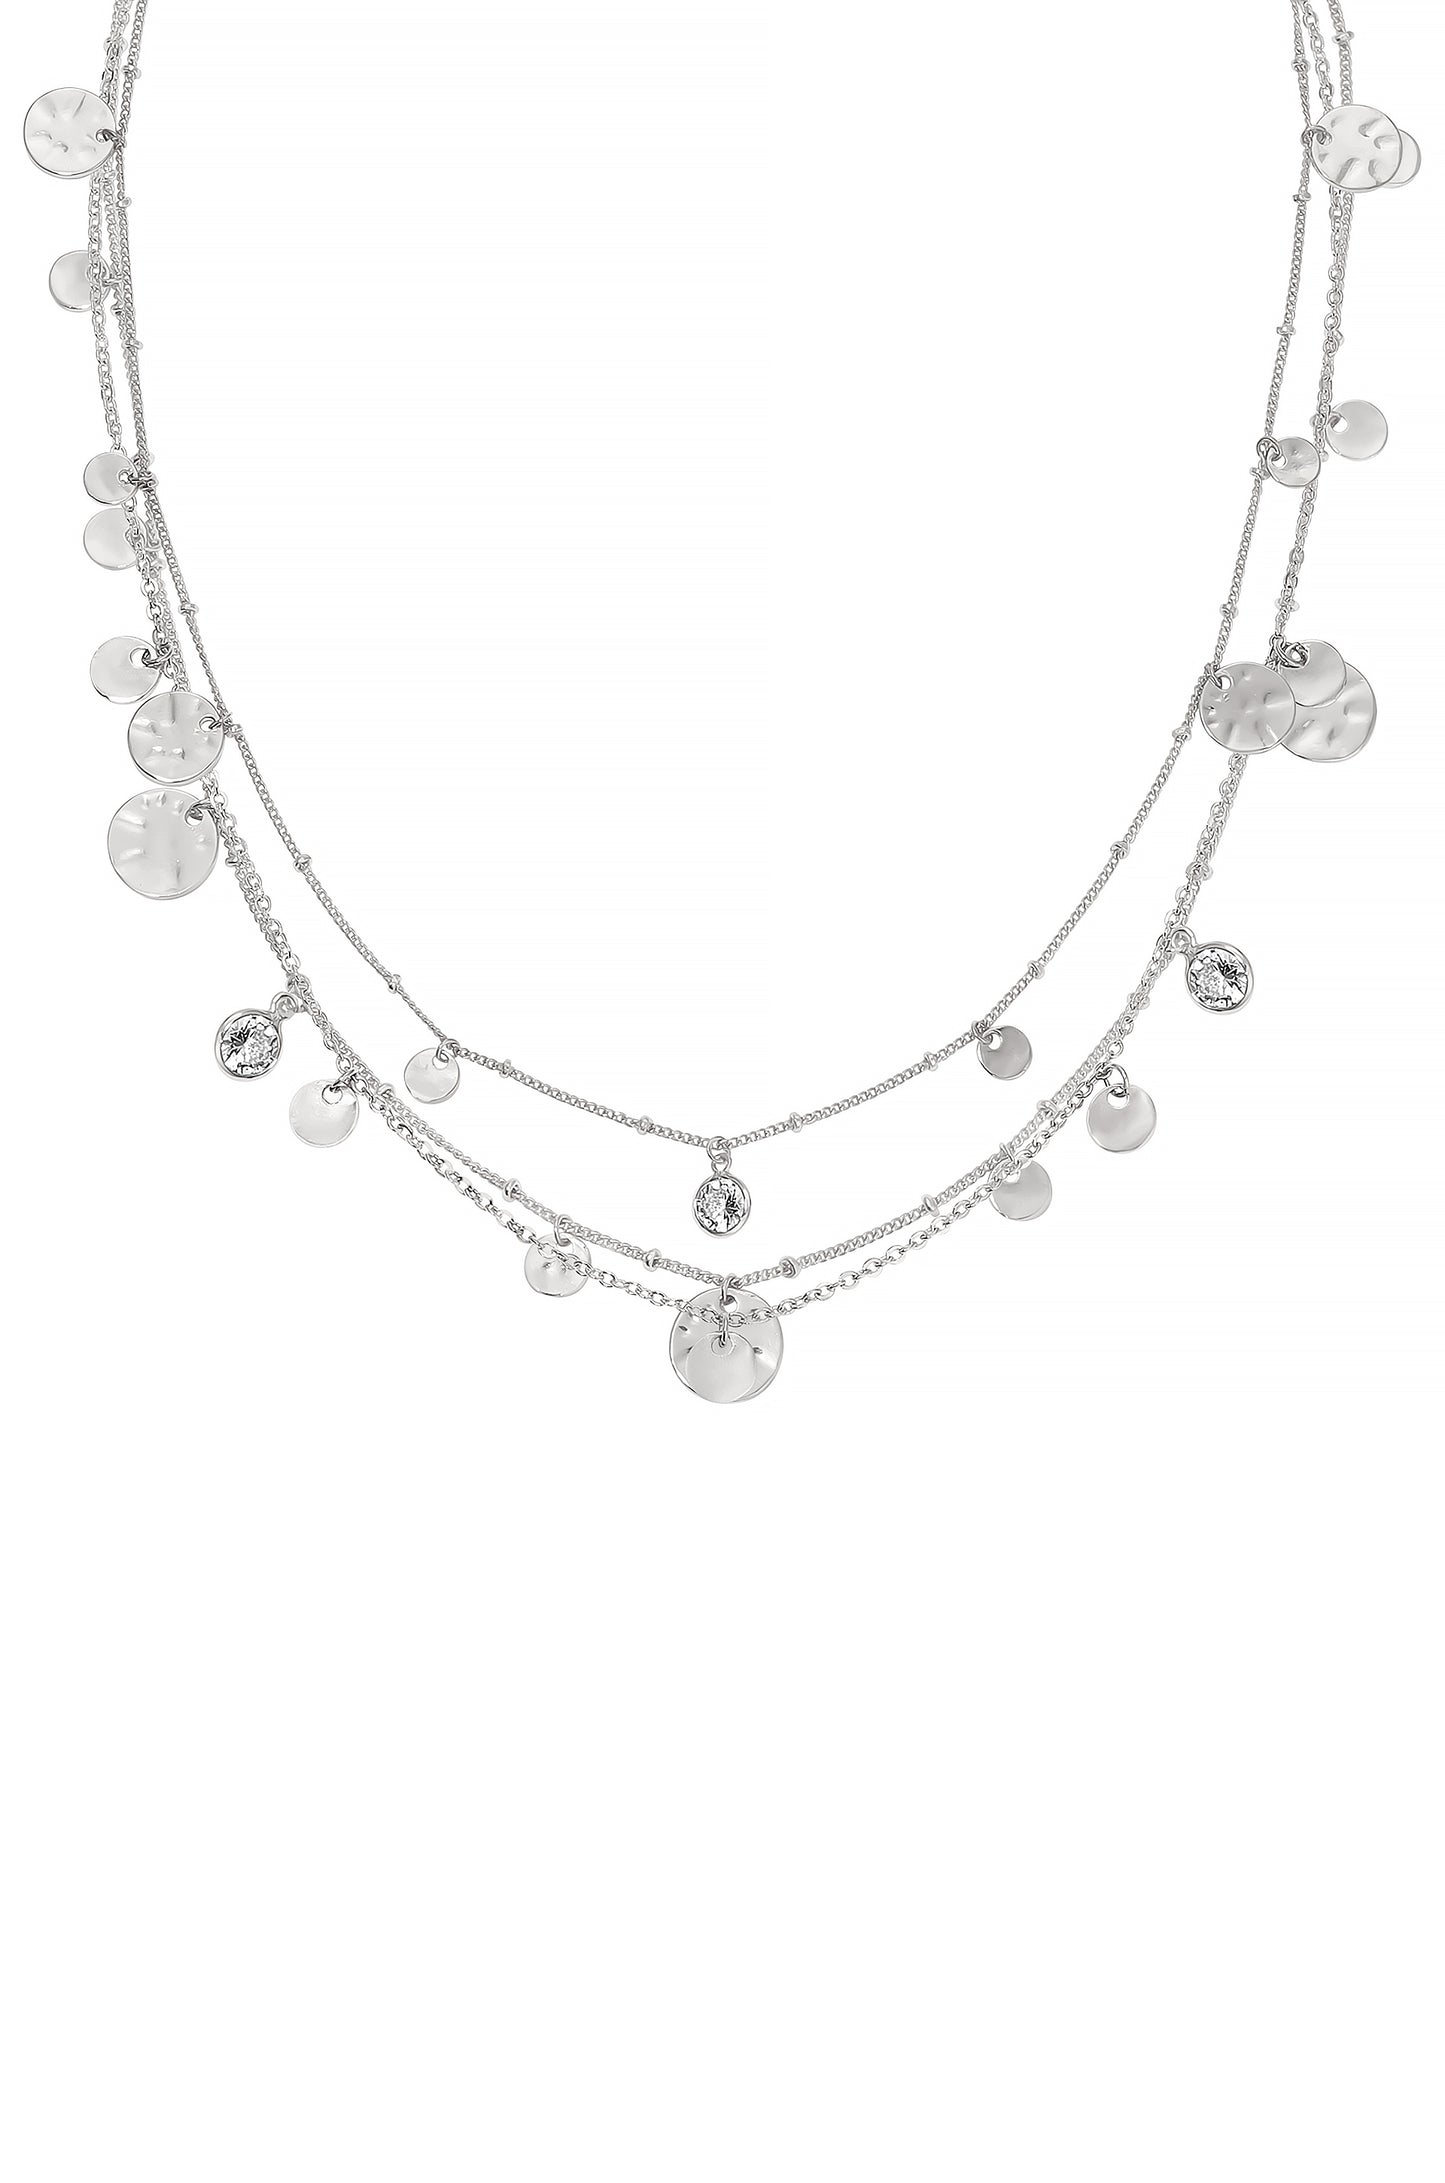 All in Layered Crystal Necklace Set in rhodium